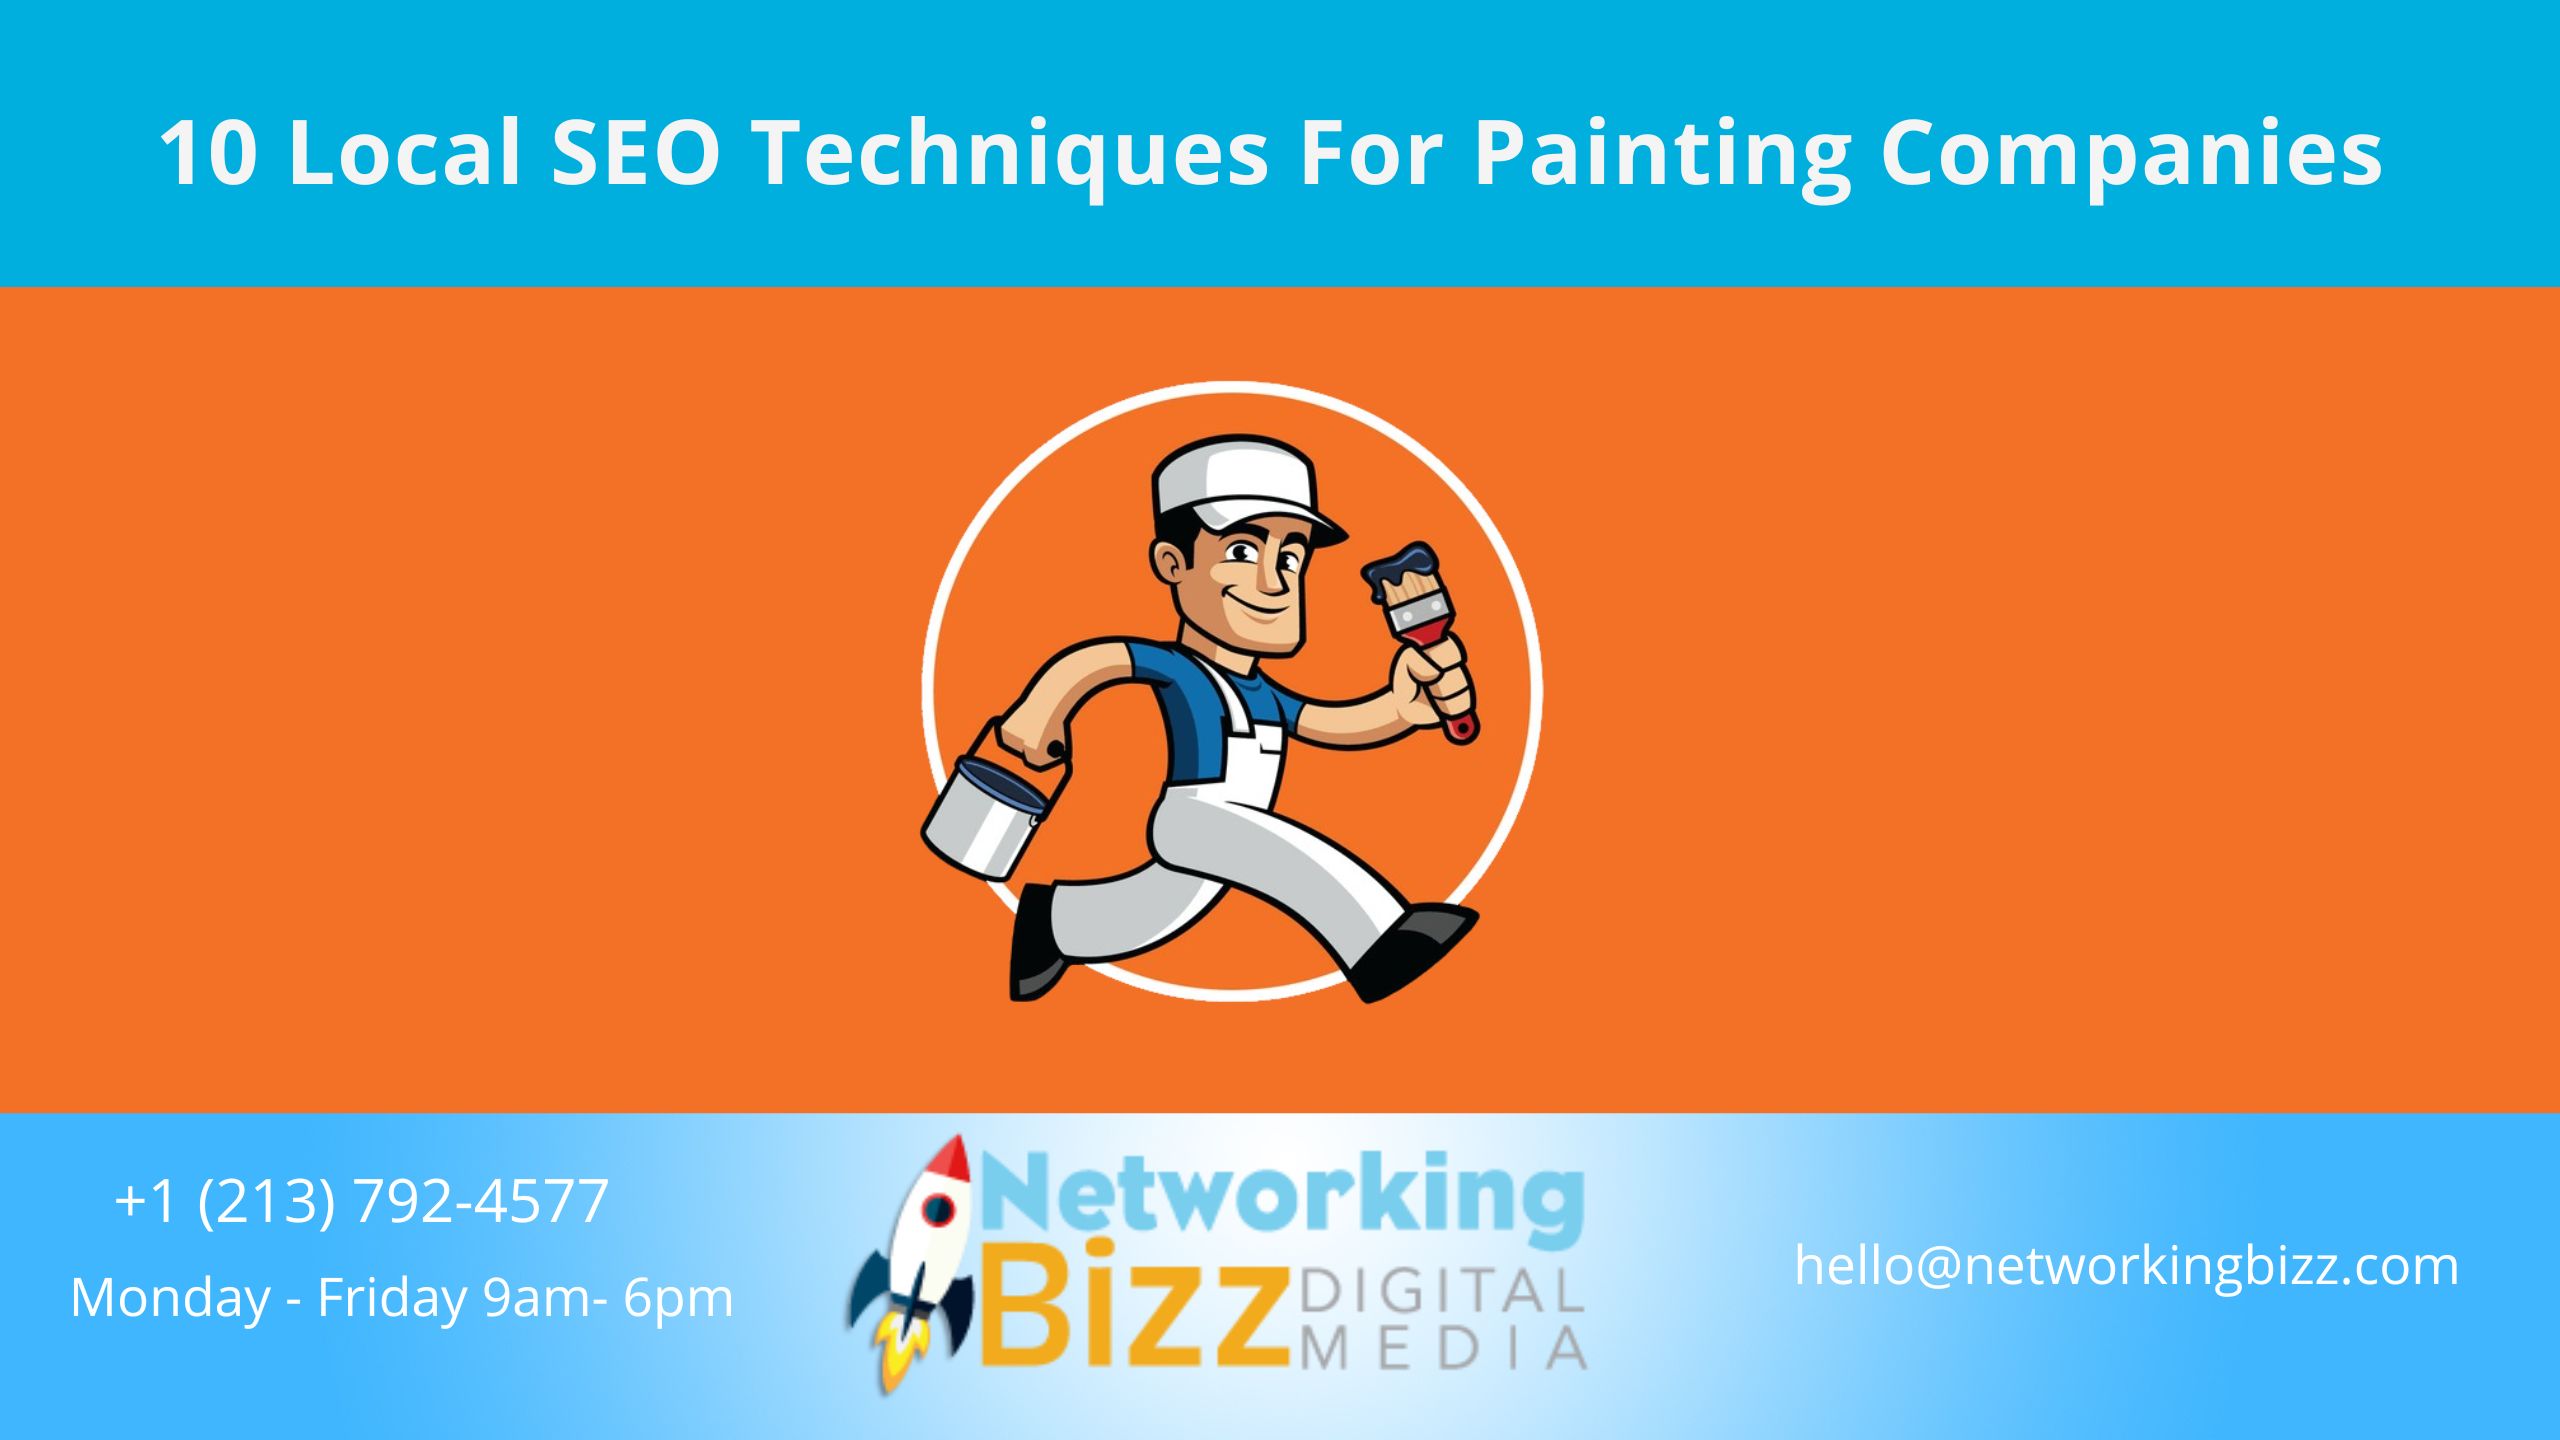 10 Local SEO Techniques For Painting Companies